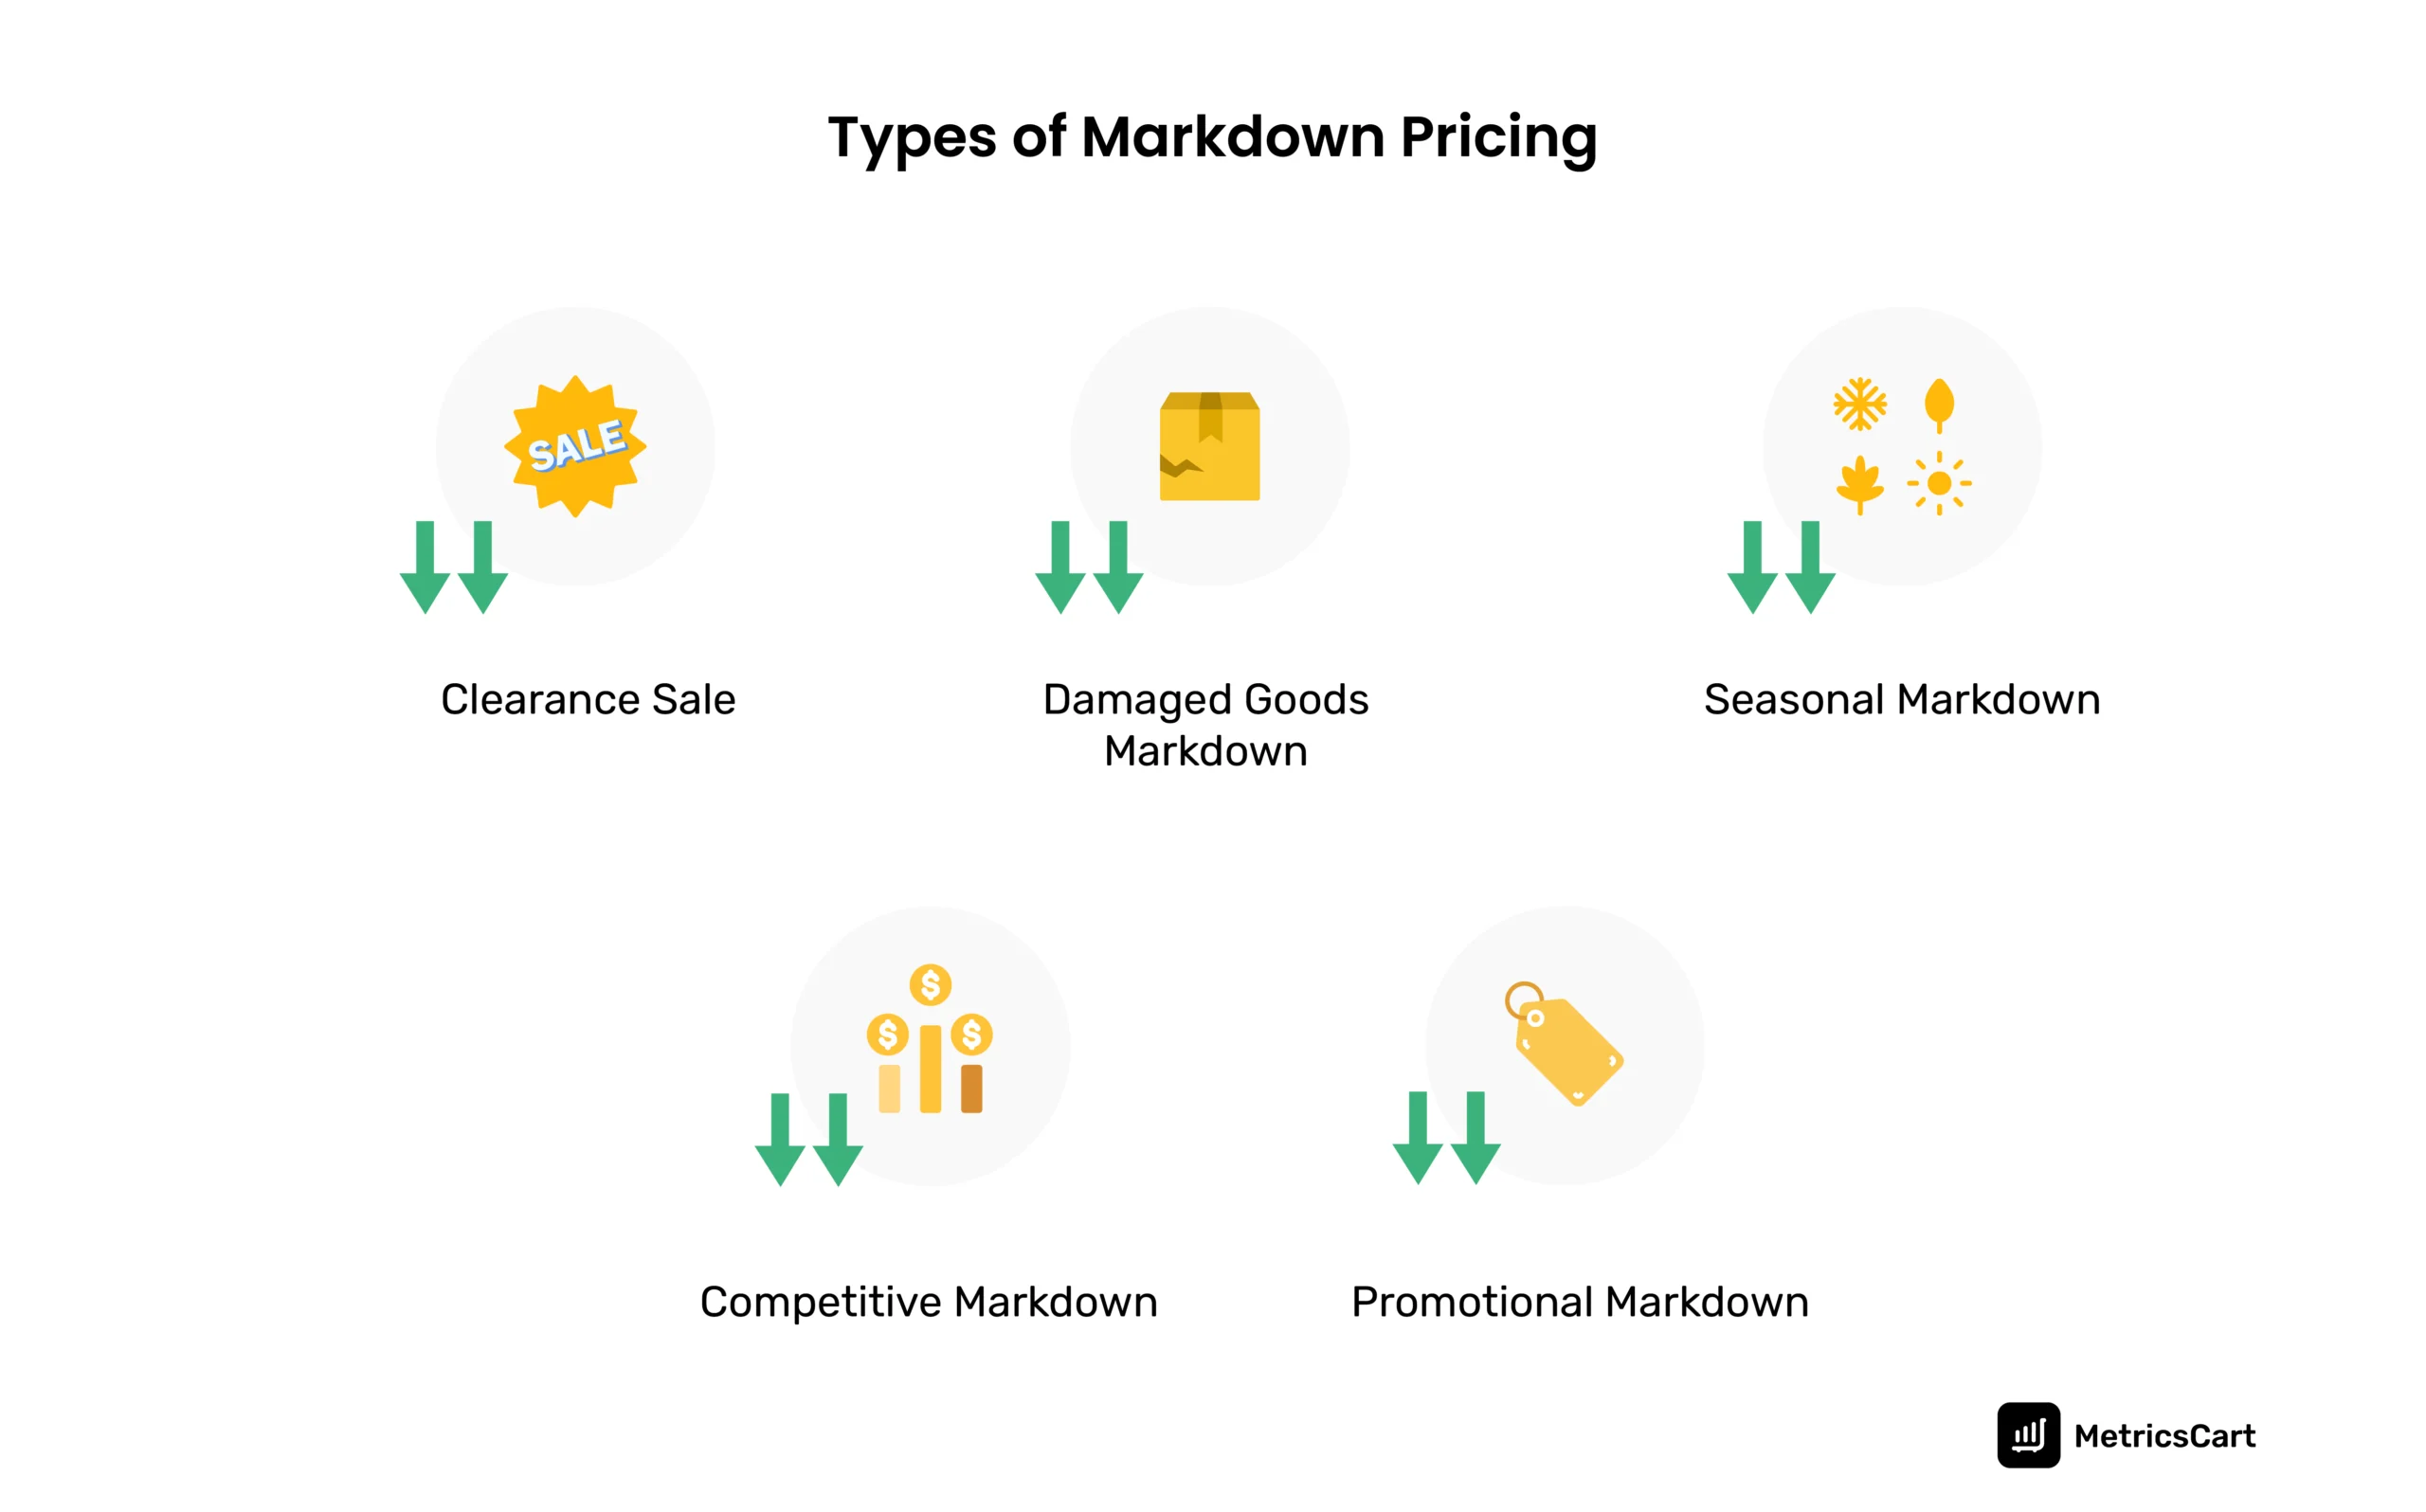 The image shows types of markdown pricing